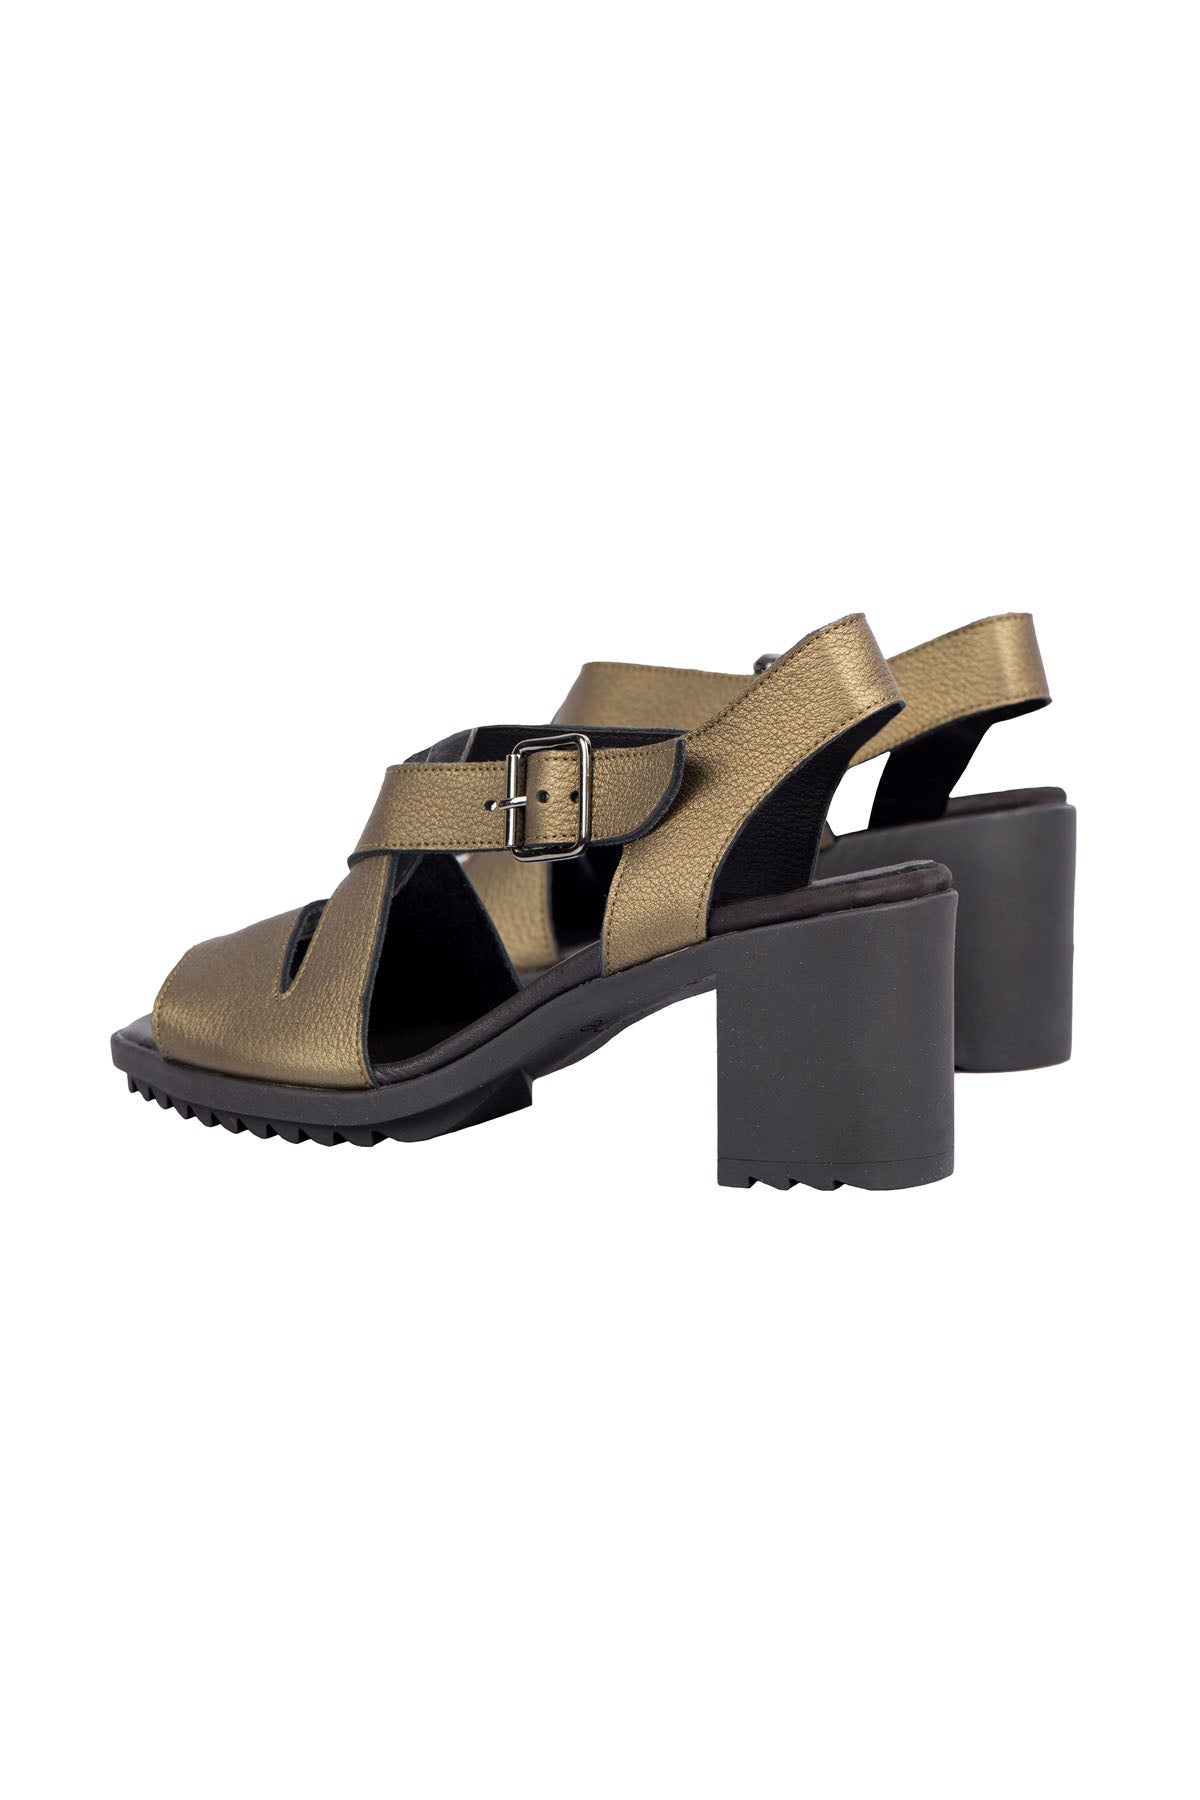 Arche Sharam Sandals - Or